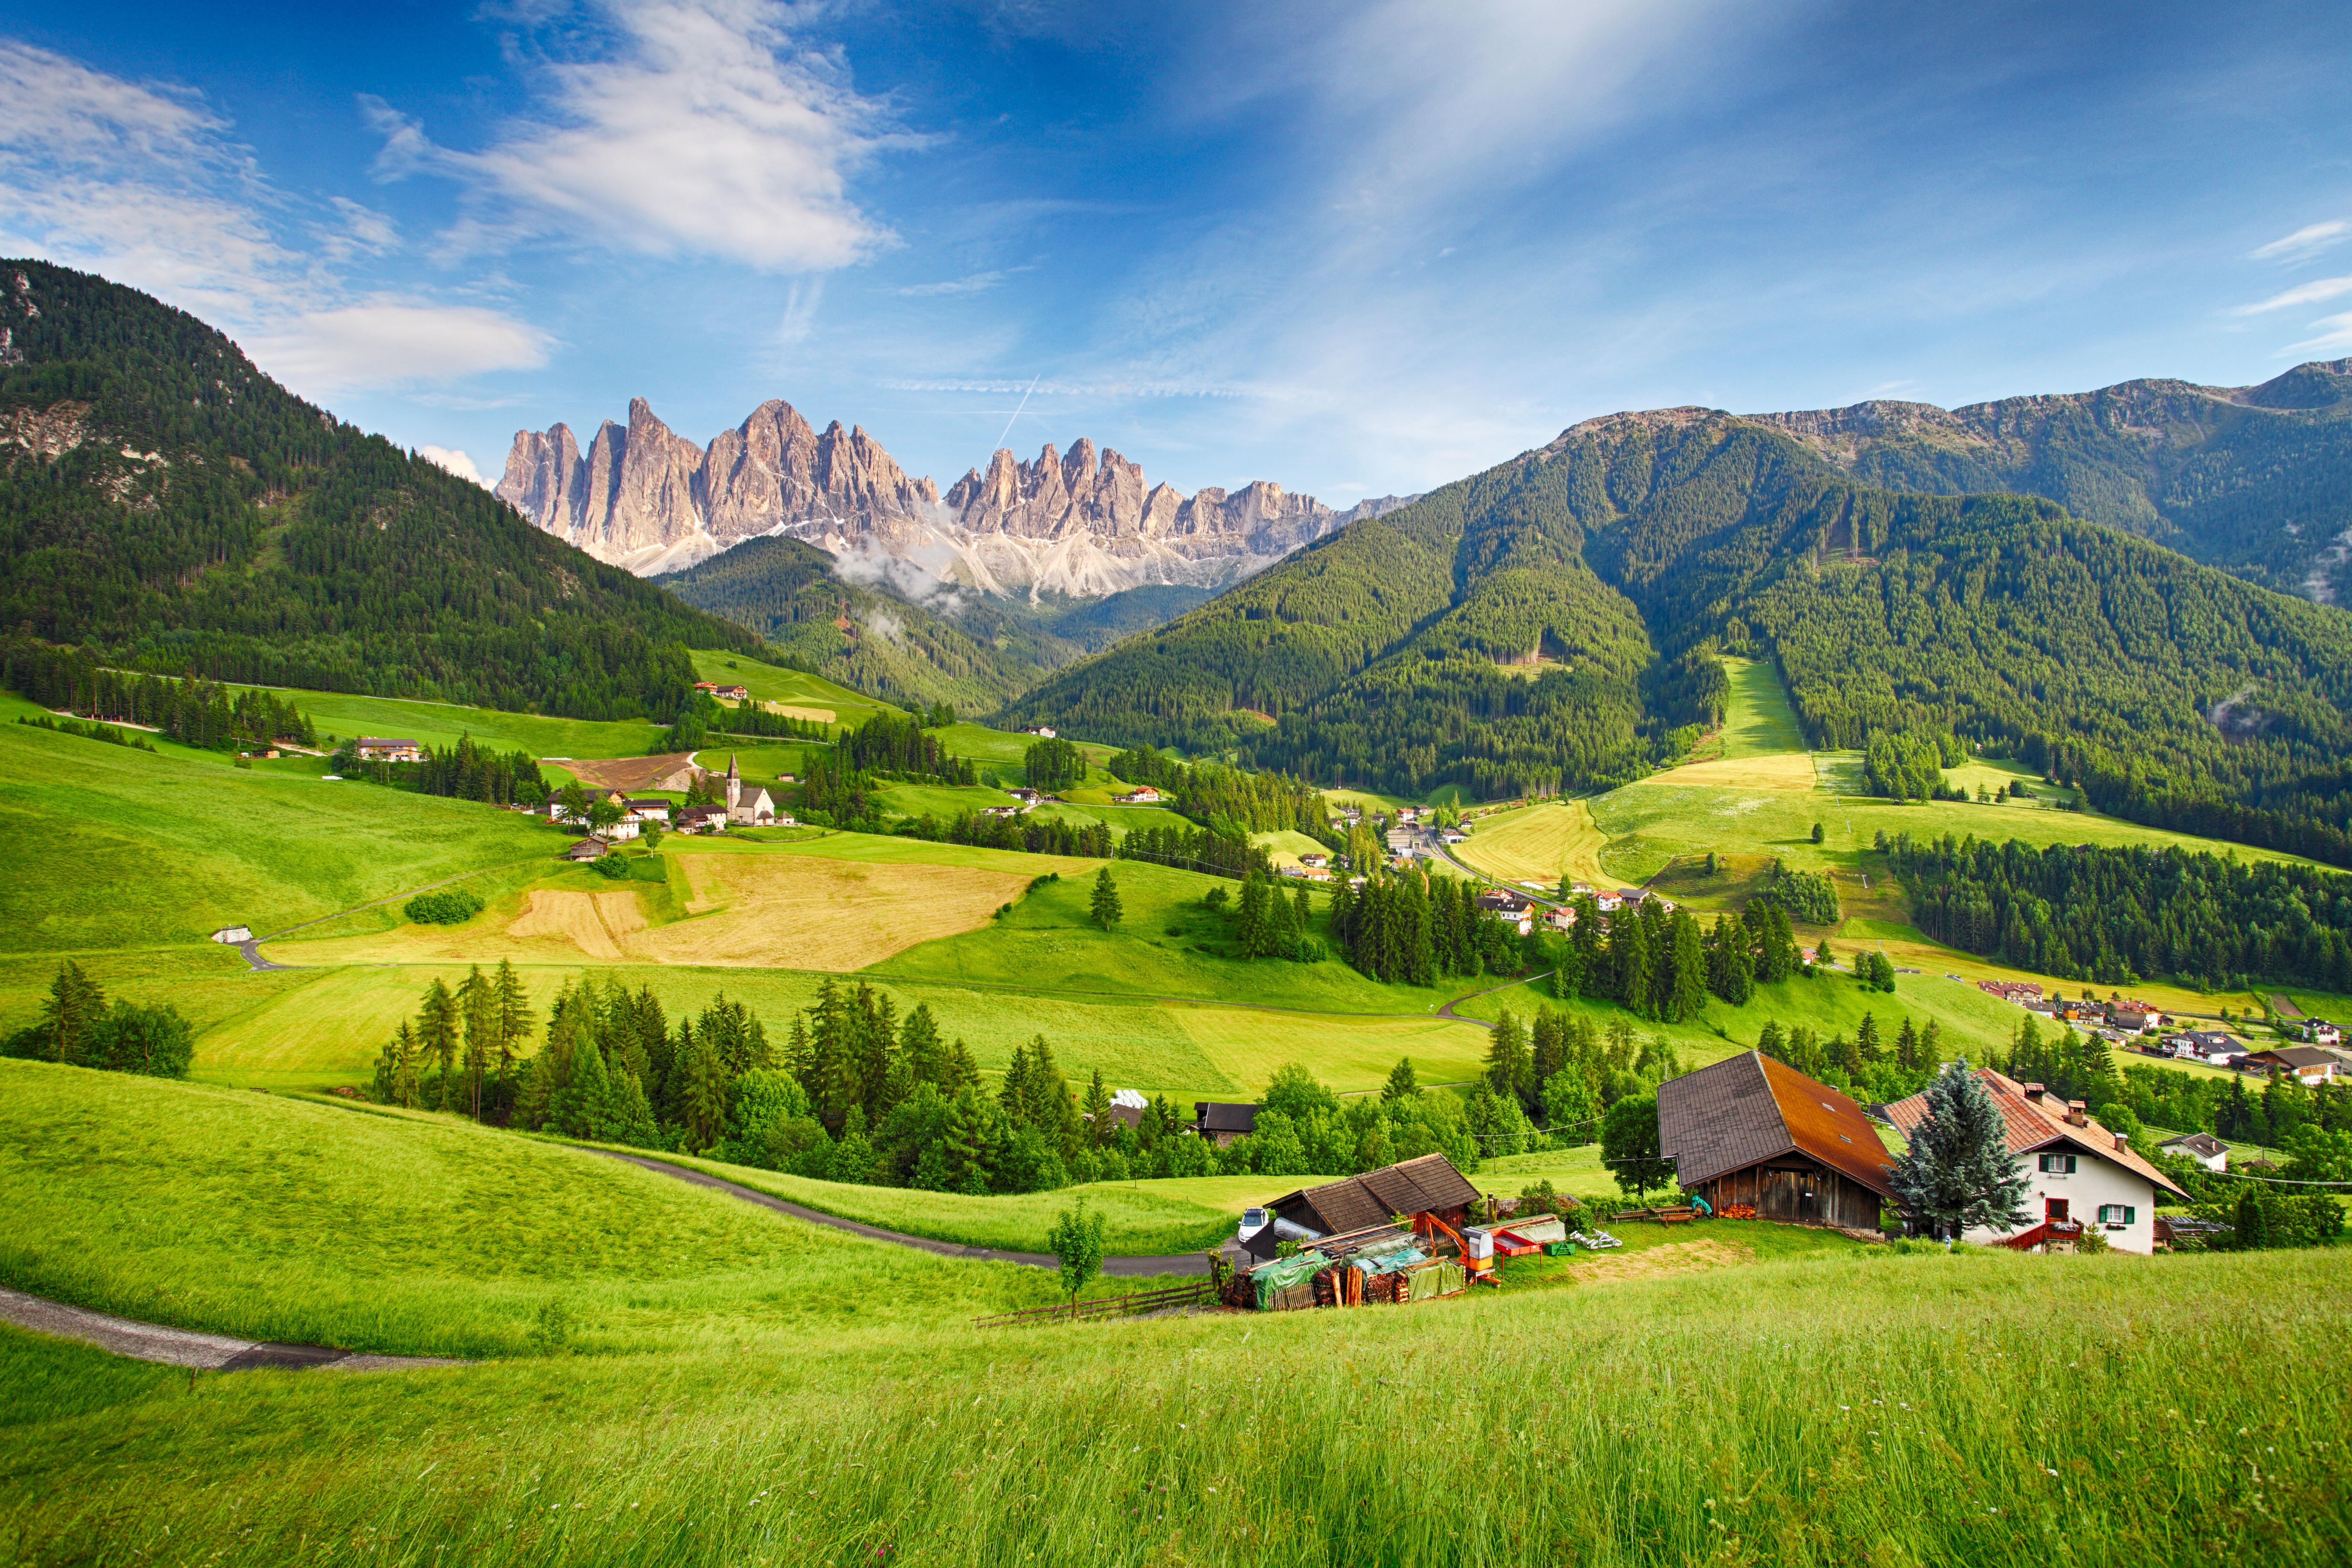 Wallpapers Dolomites Alps Italy mountains on the desktop